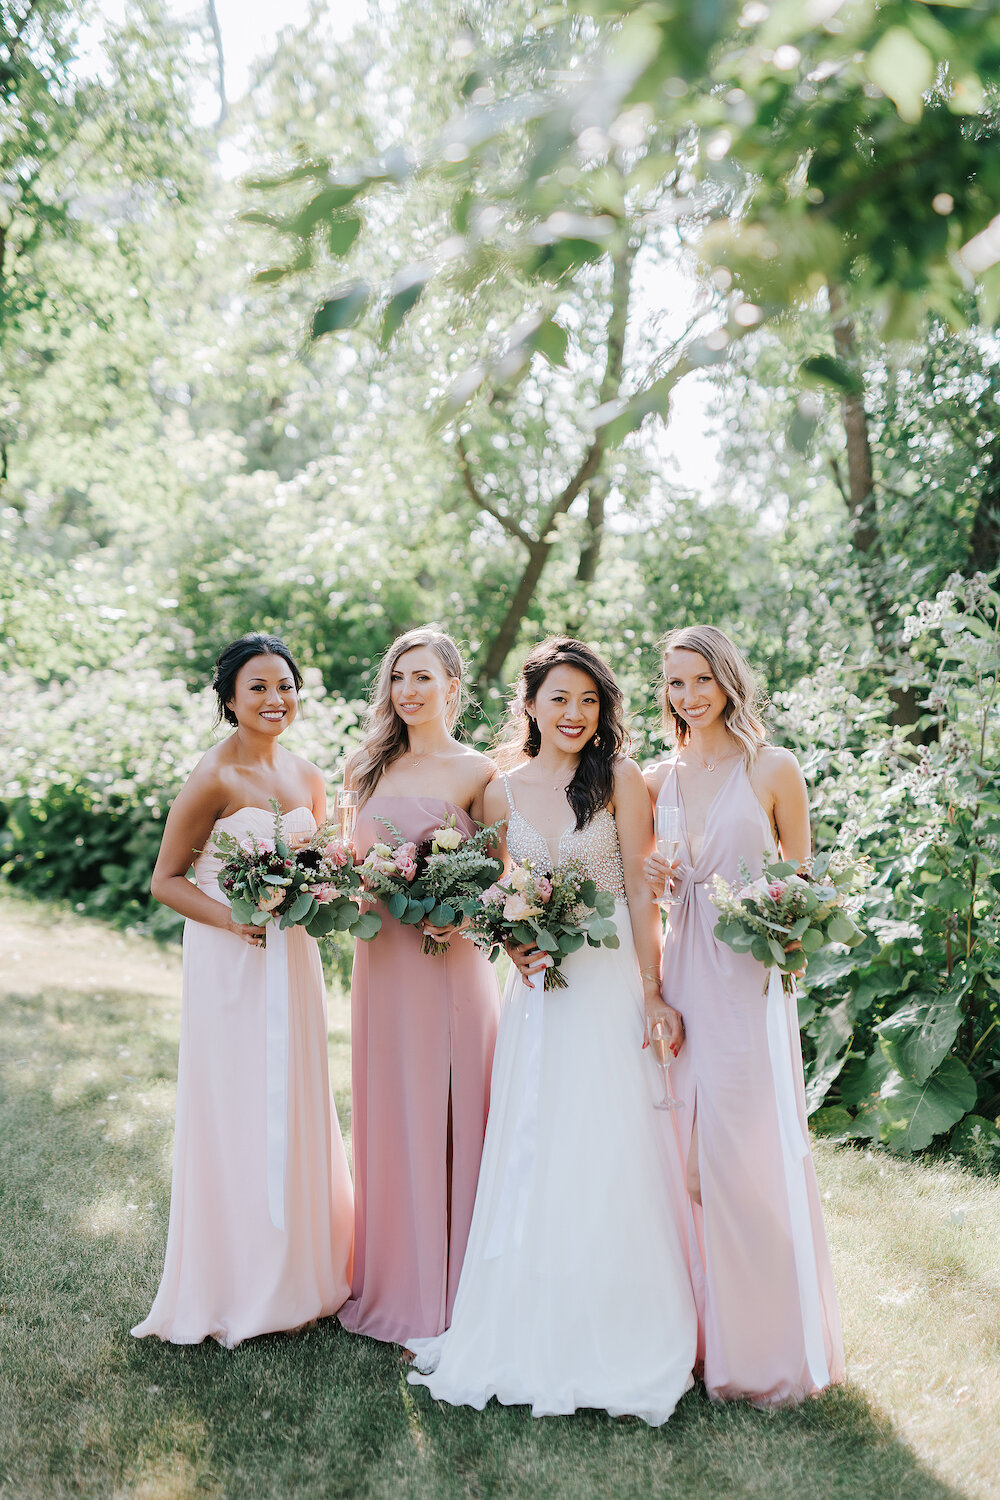 Whimsical Garden Inspired Wedding at the Gates on Roblin | Stone House ...